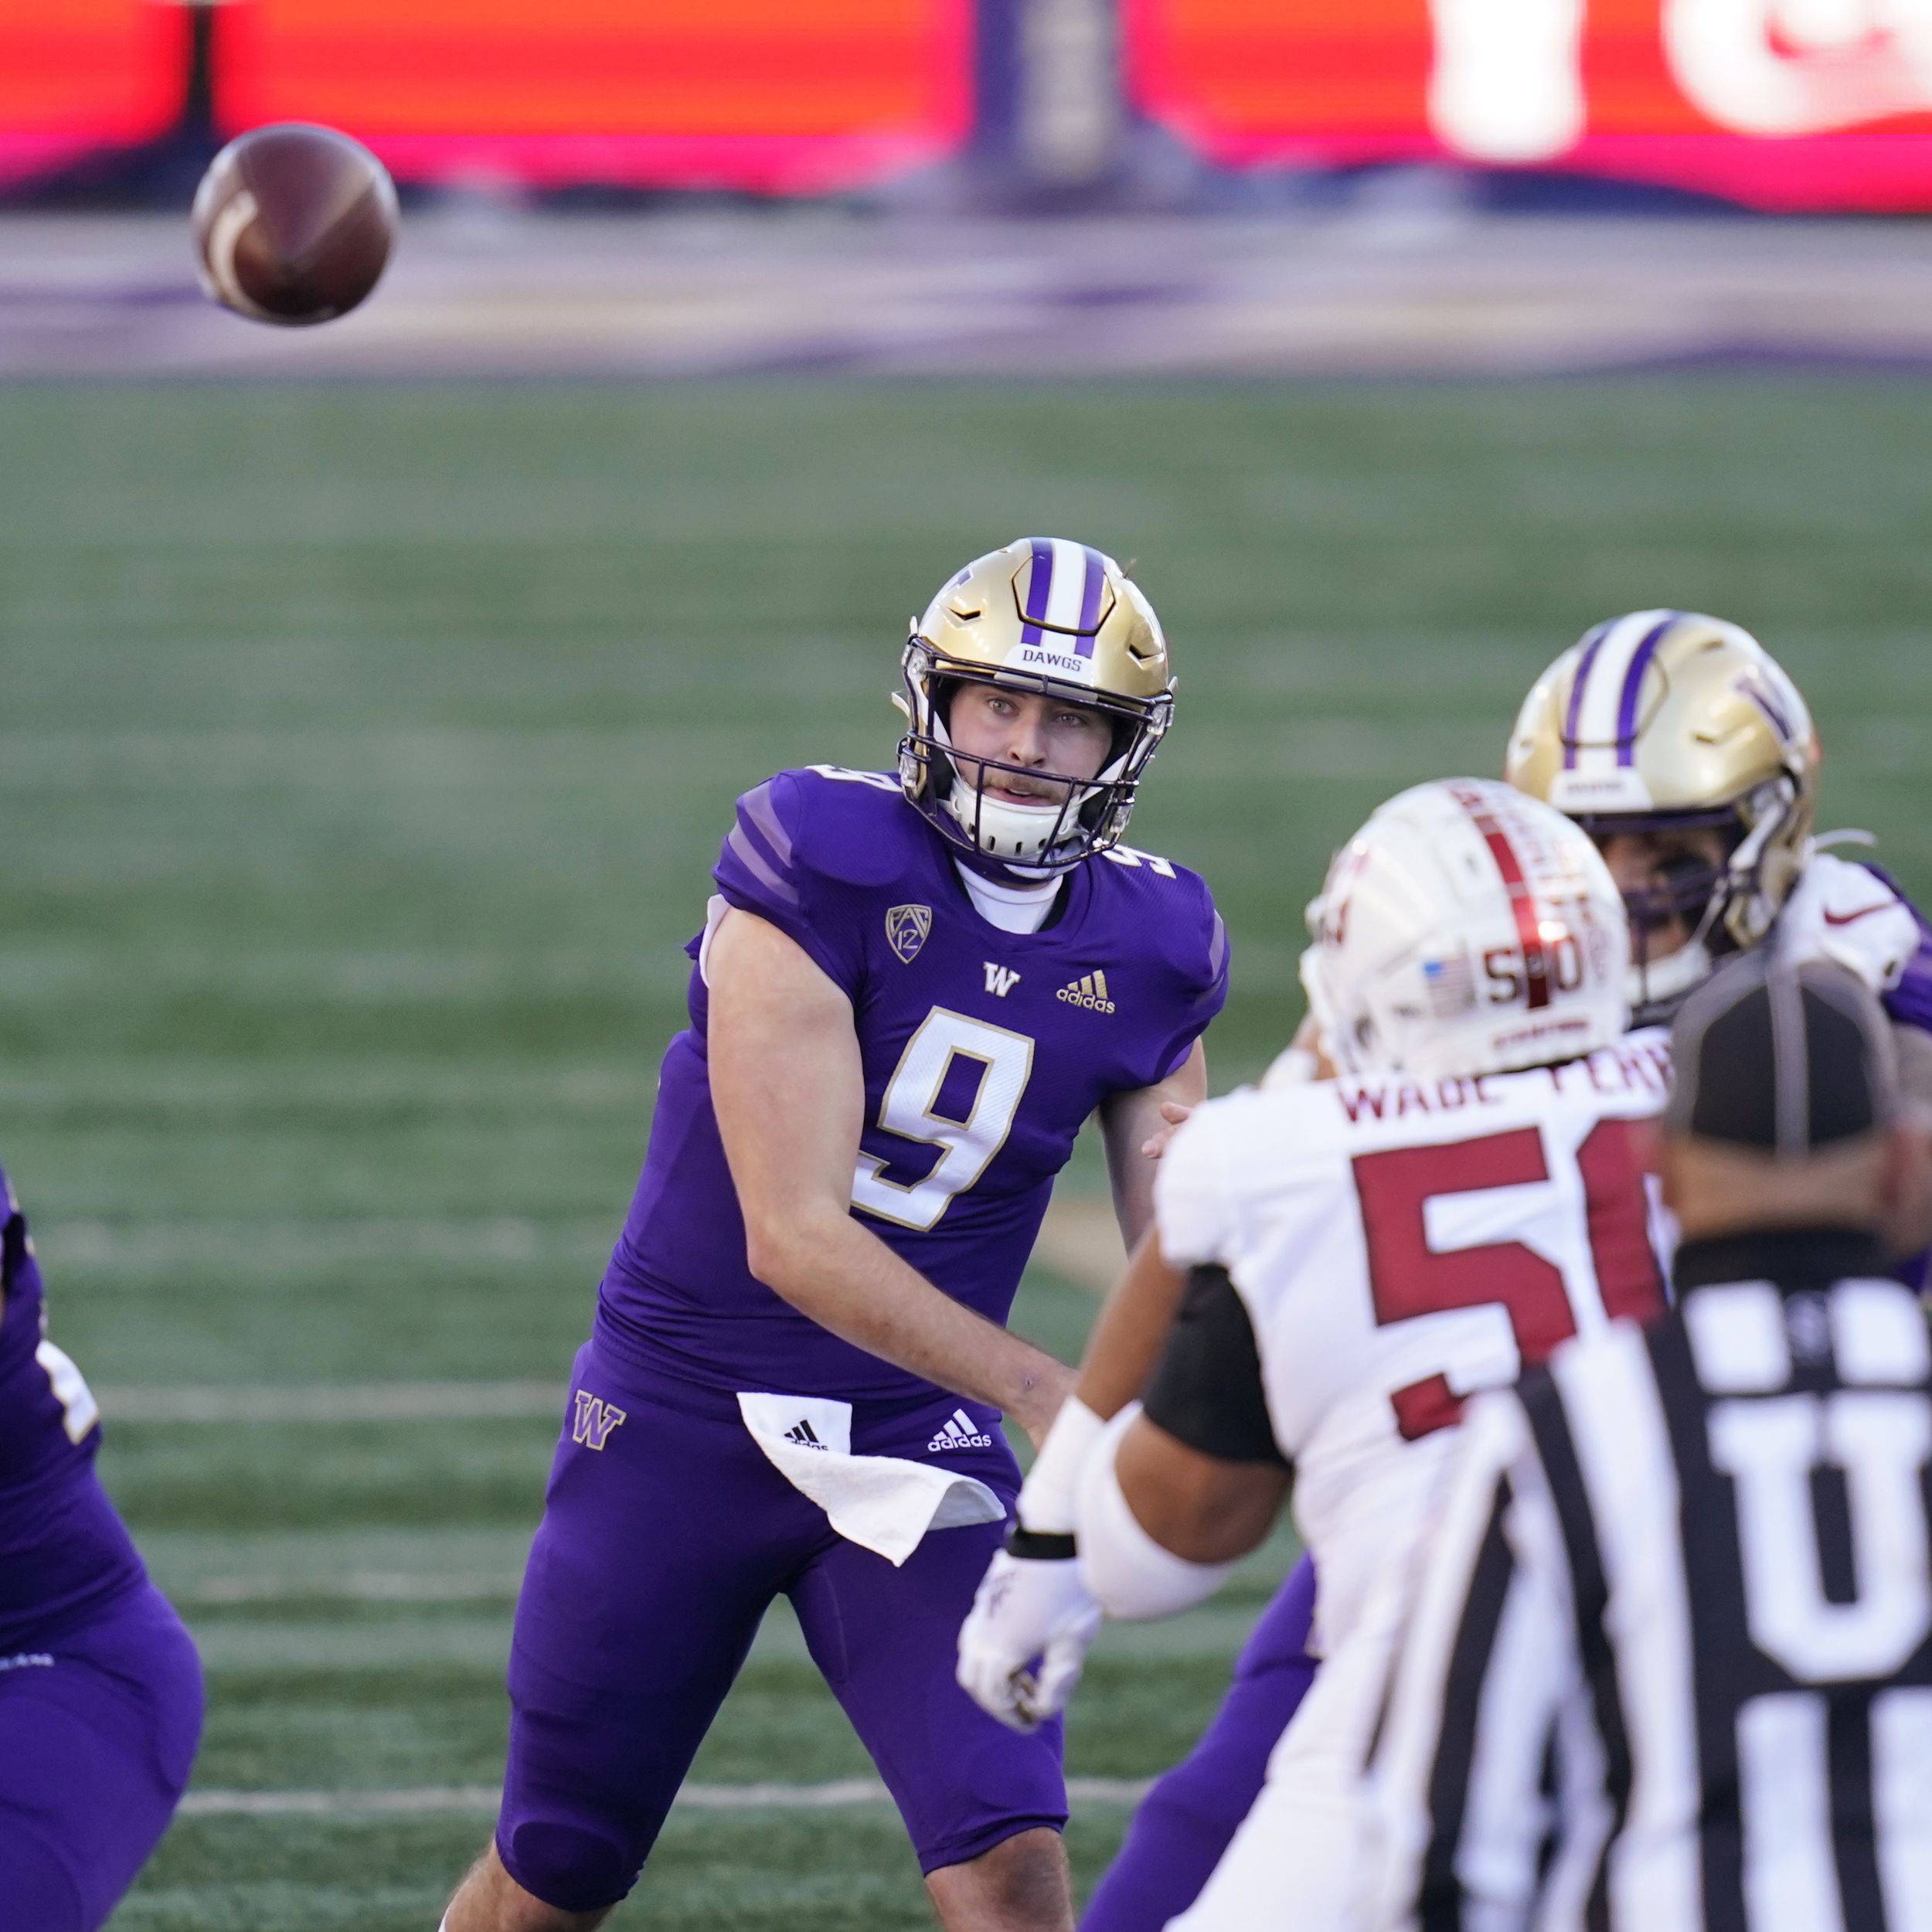 Pac-12 North champion UW Huskies to (maybe) meet USC in conference